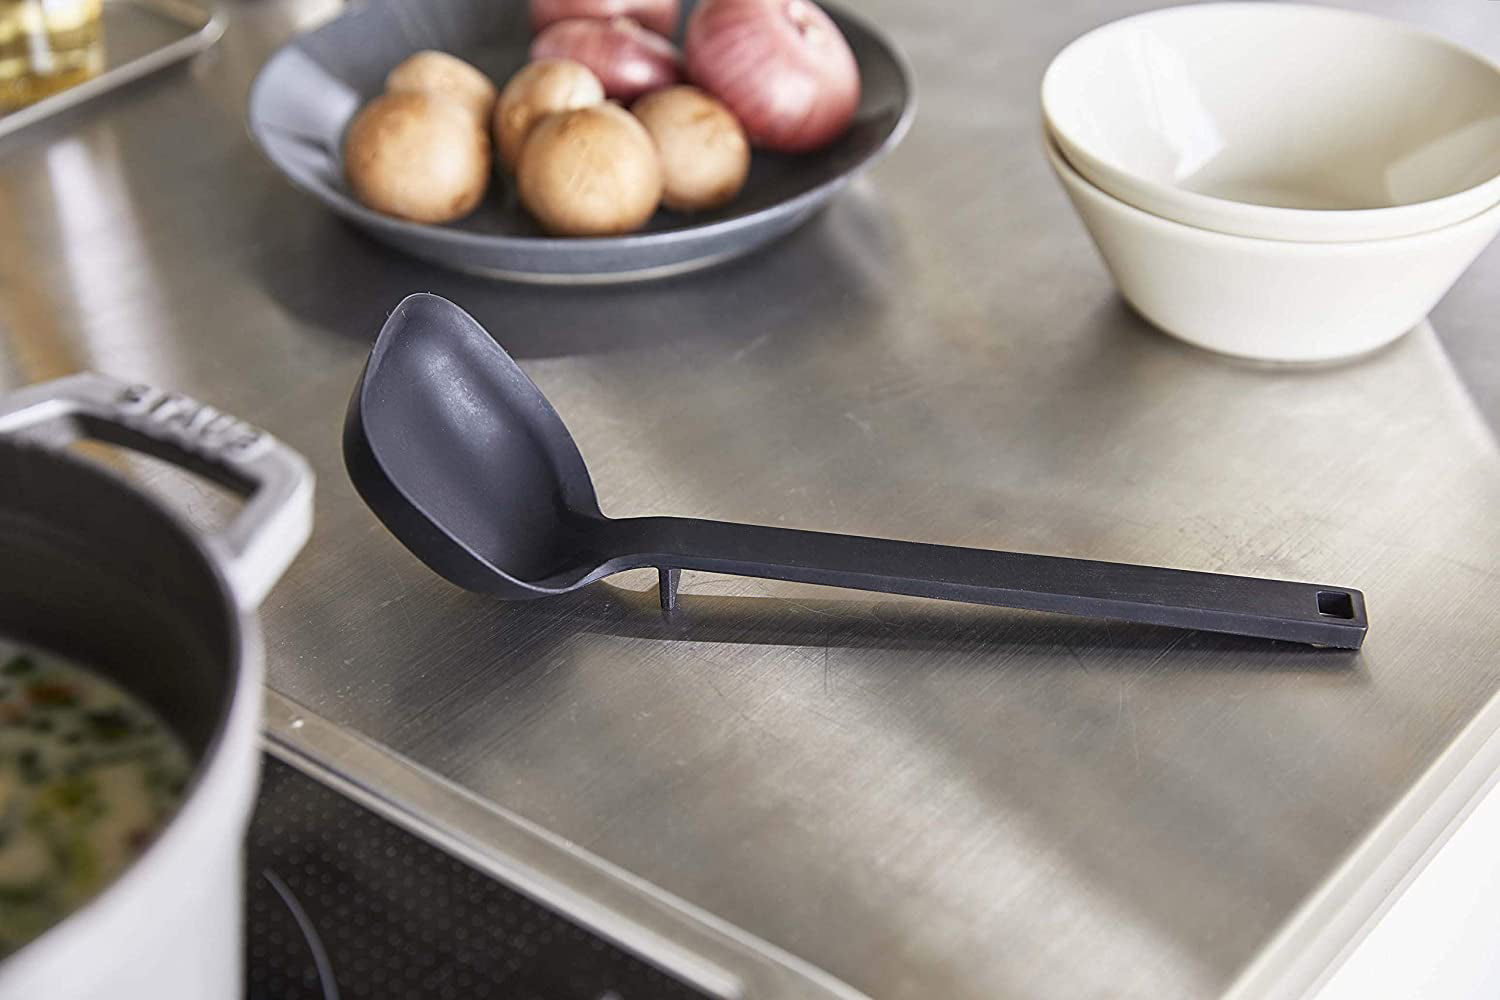 View 2 - Side view of black Floating Ladle on kitchen counter by Yamazaki Home.